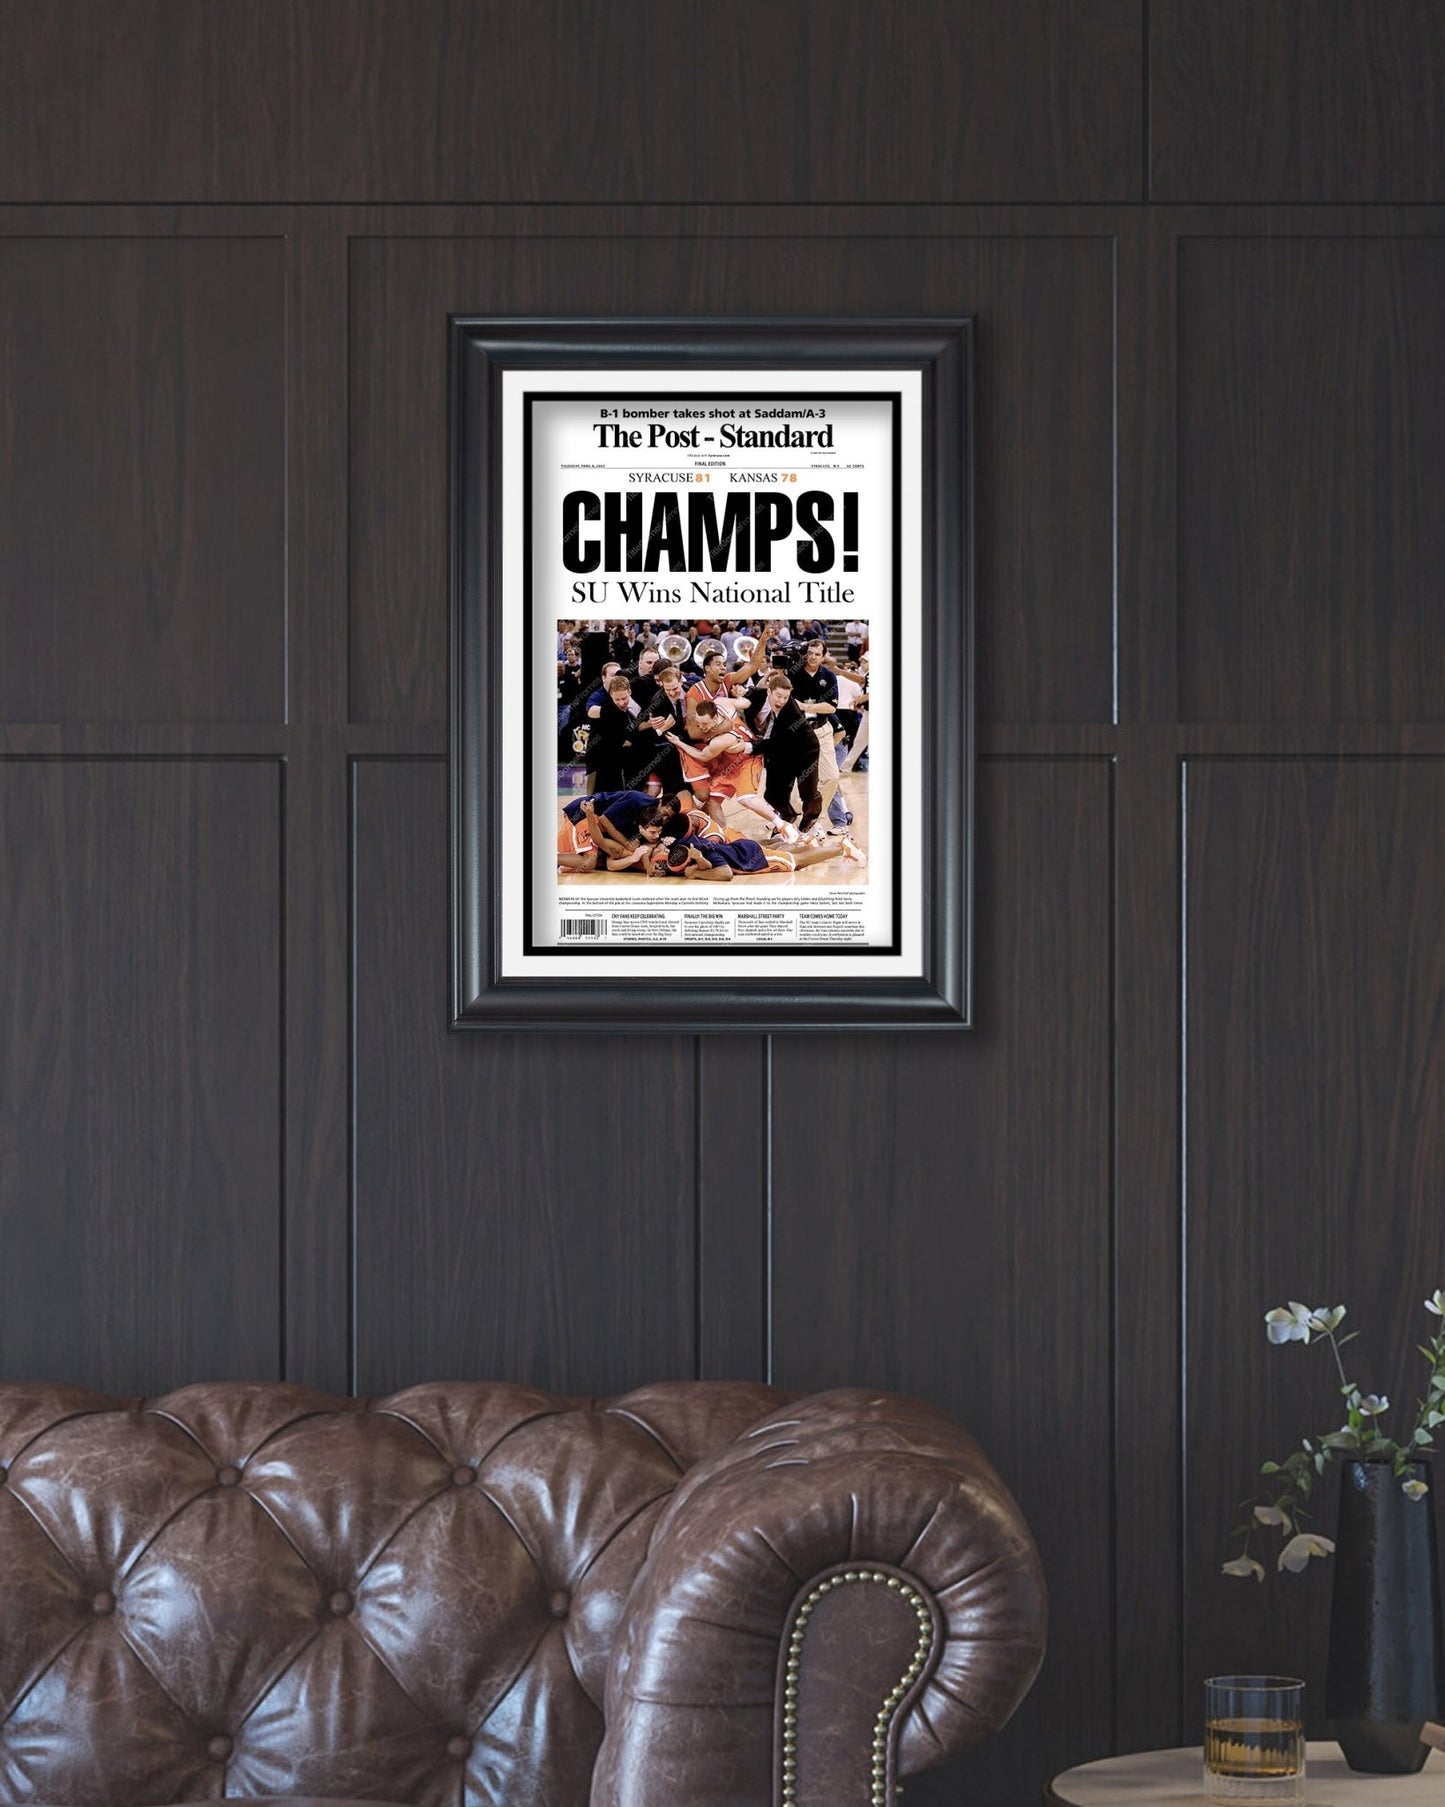 2003 Syracuse Orangemen NCAA College Basketball Champions Framed Front Page Newspaper Print - Title Game Frames